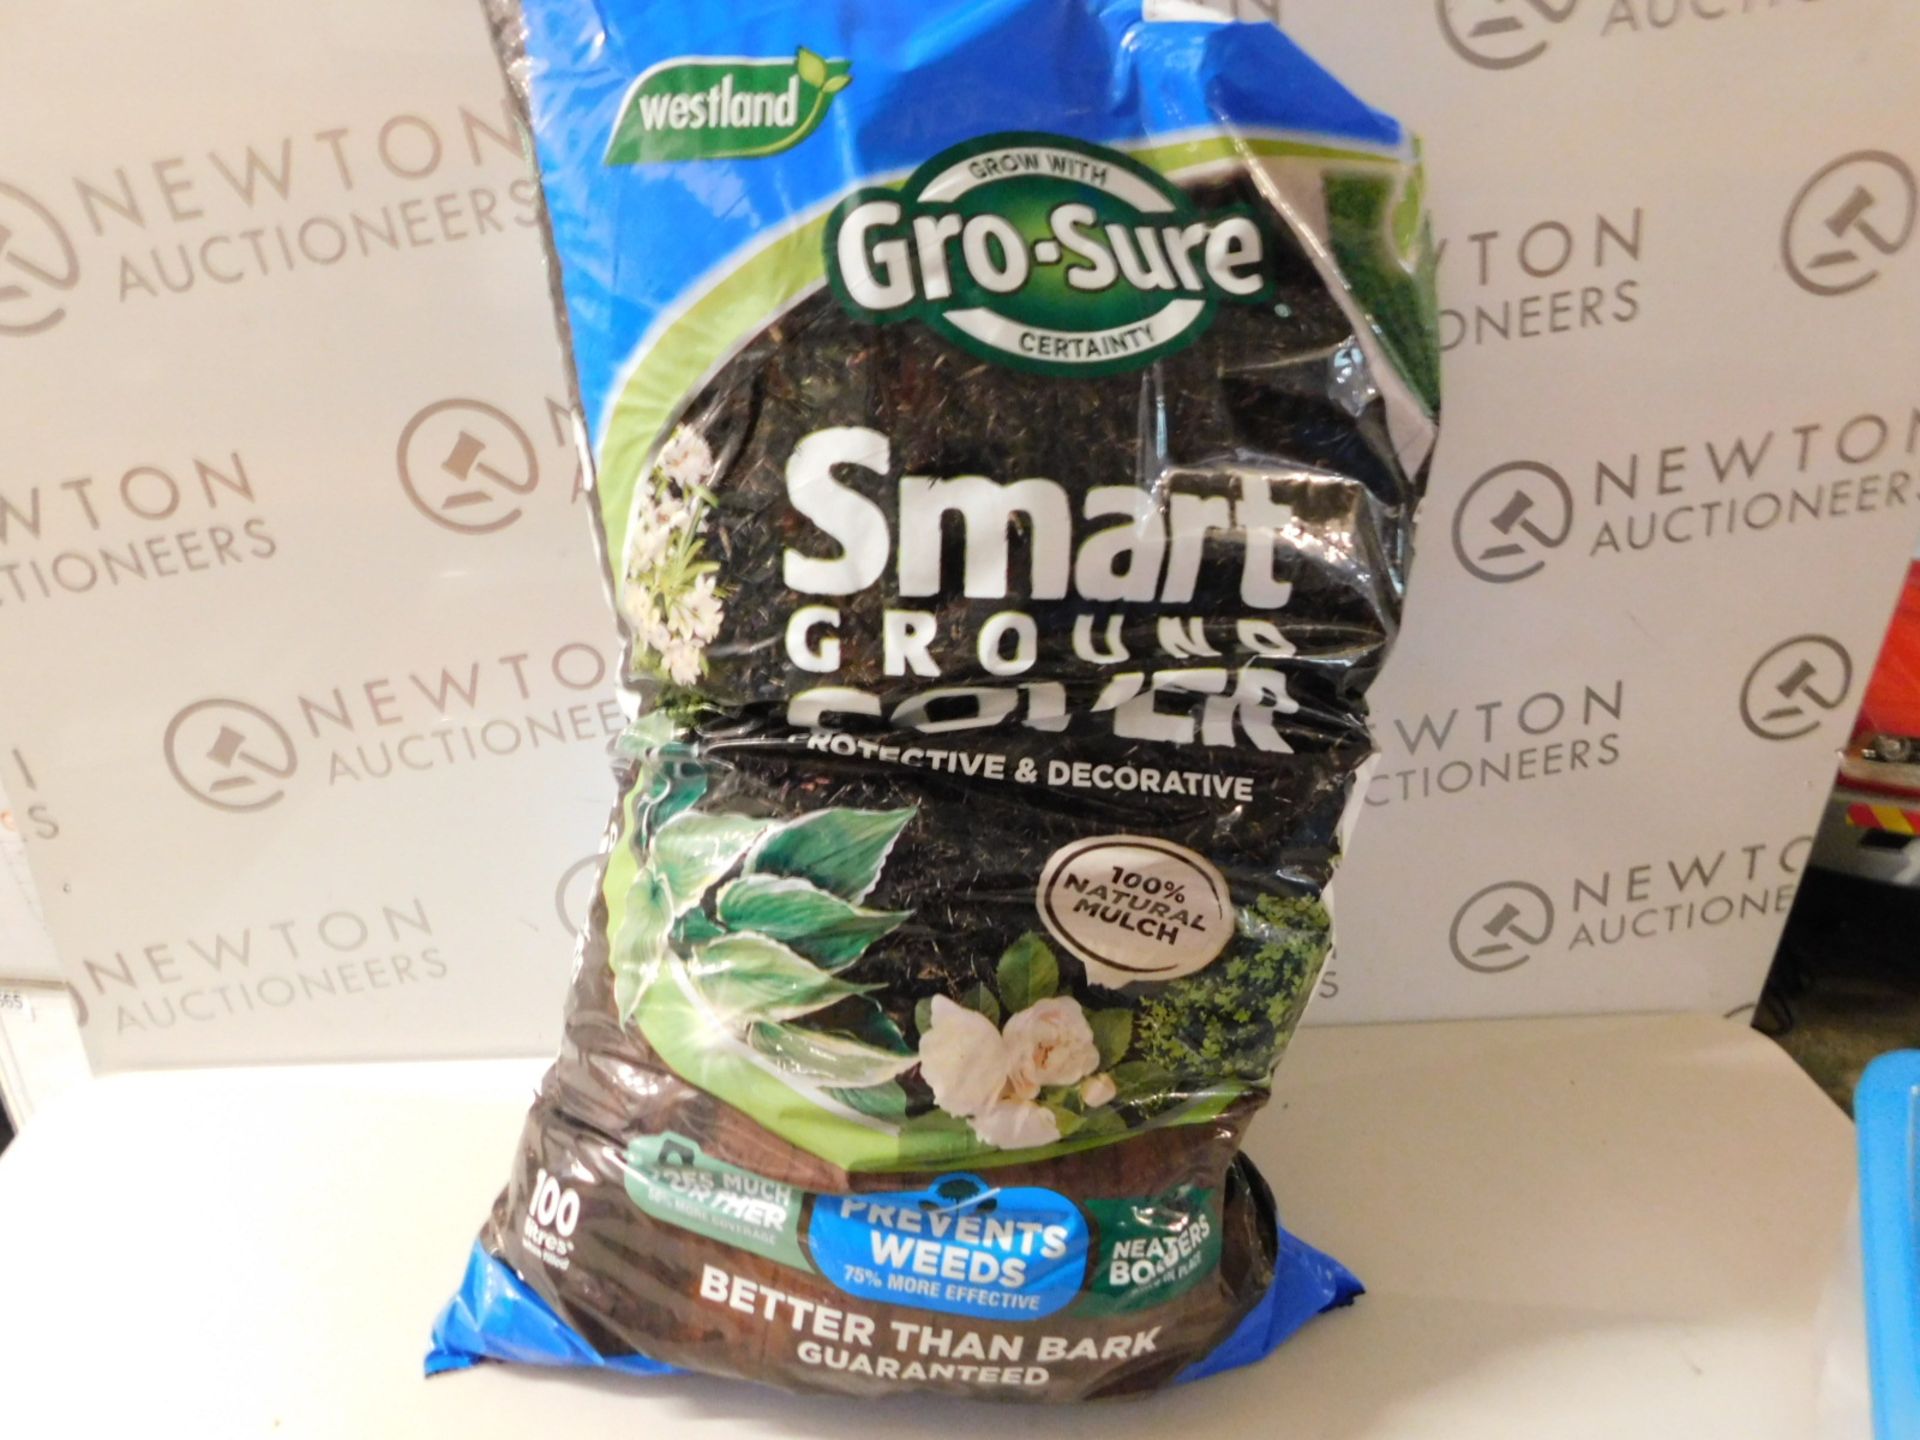 1 BAGGED GRO-SURE SMART GROUND COVER RRP £29.99